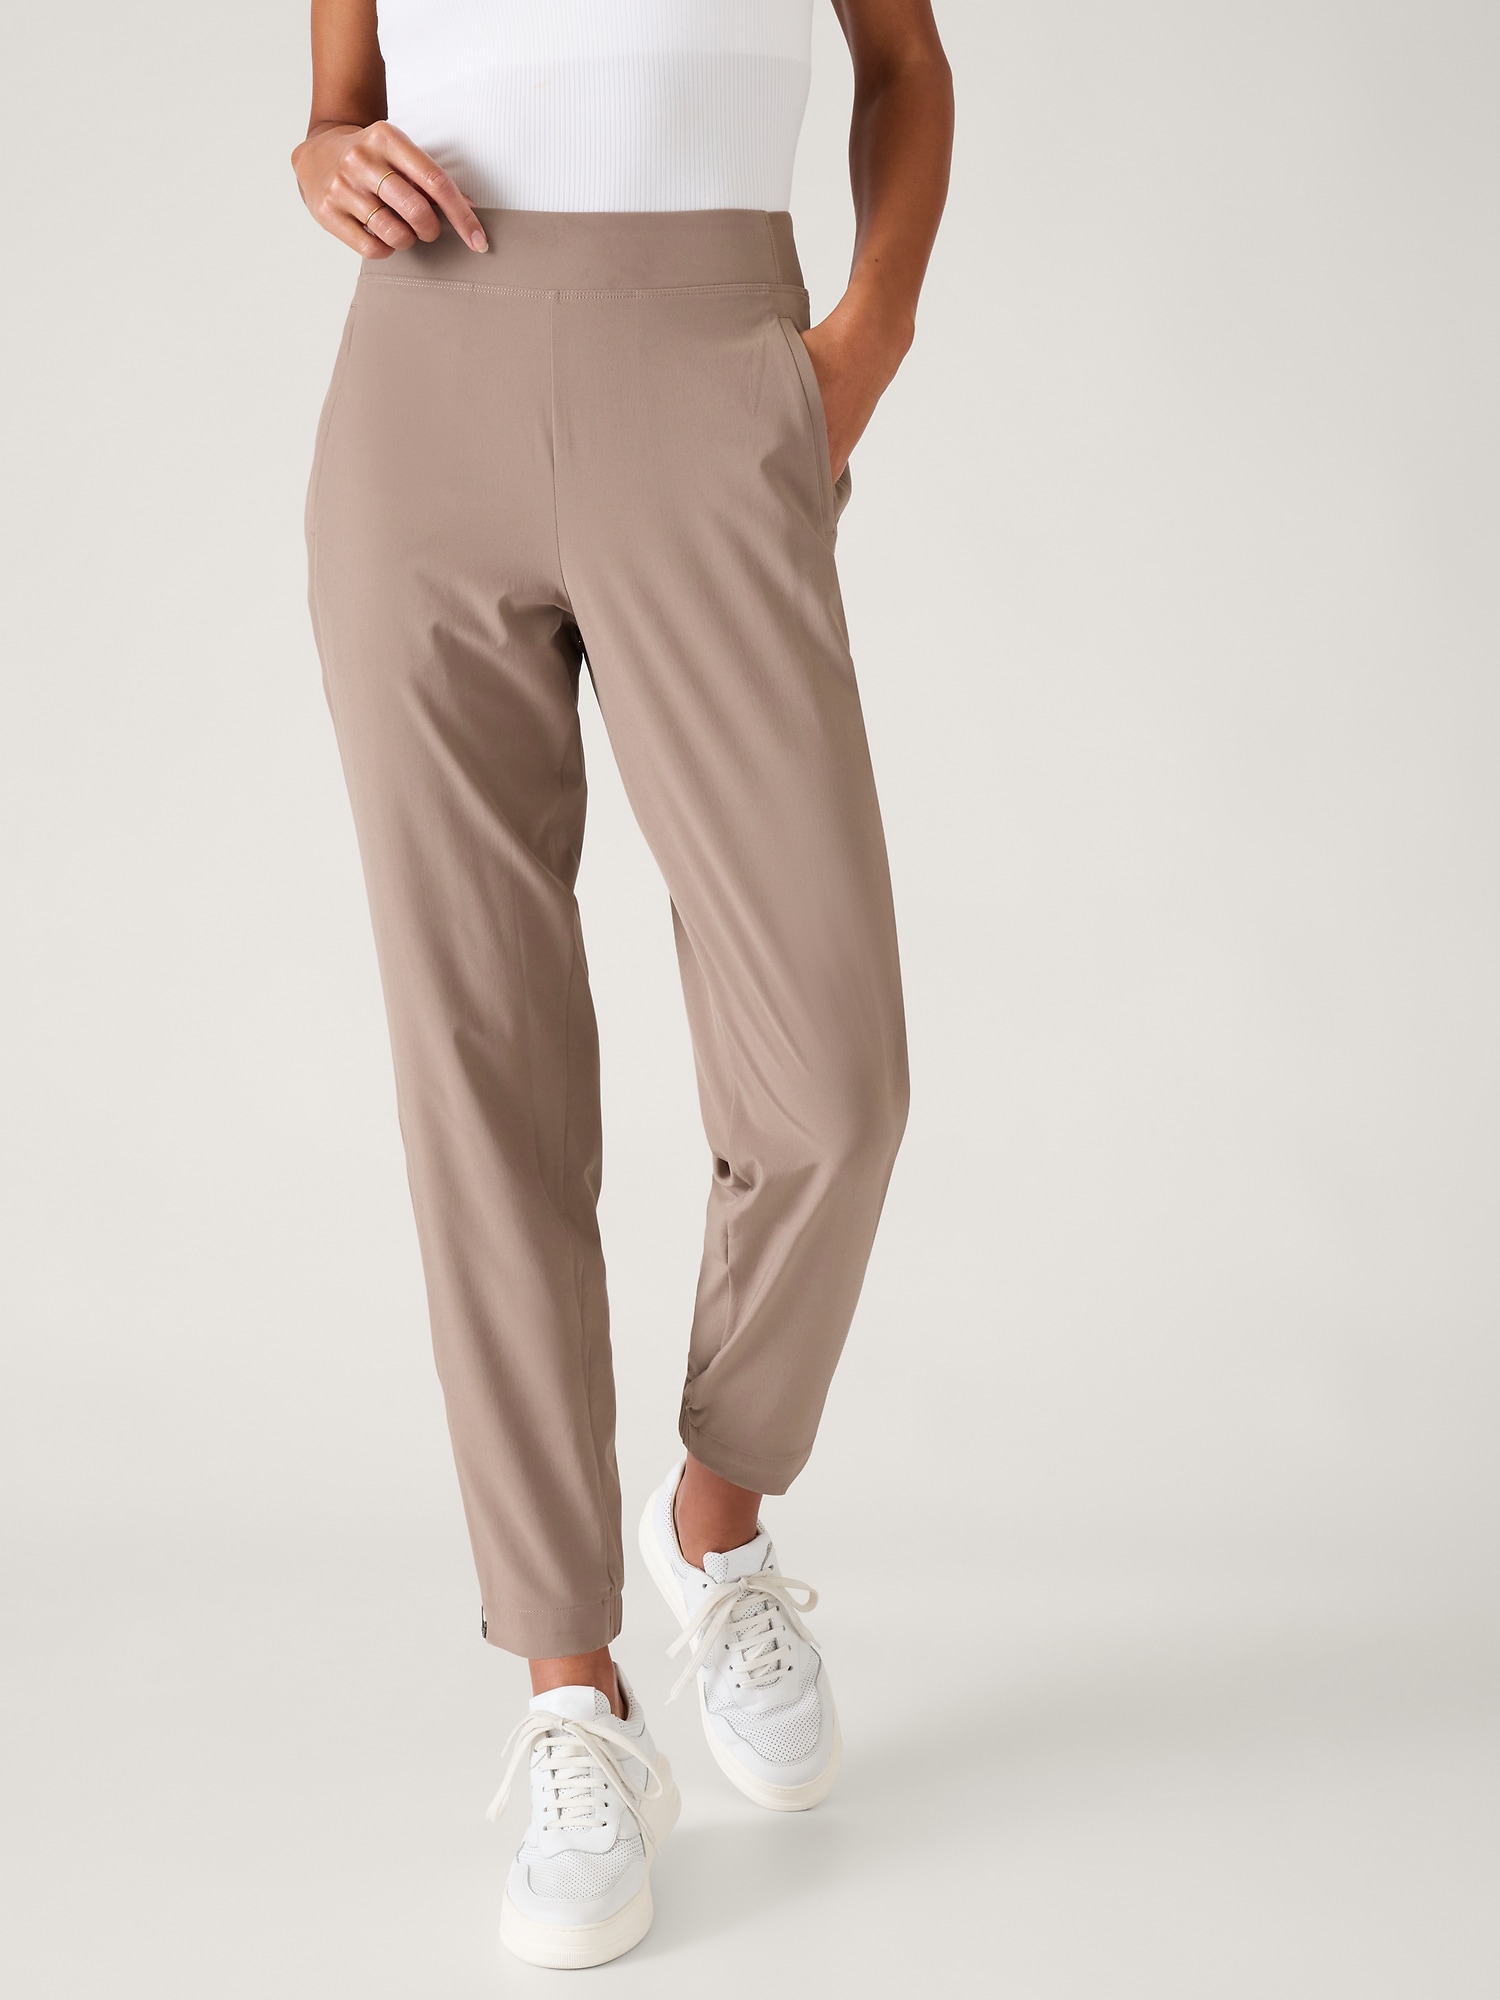 Lululemon On the Fly Jogger Pants Silver Screen Size 2 Womens